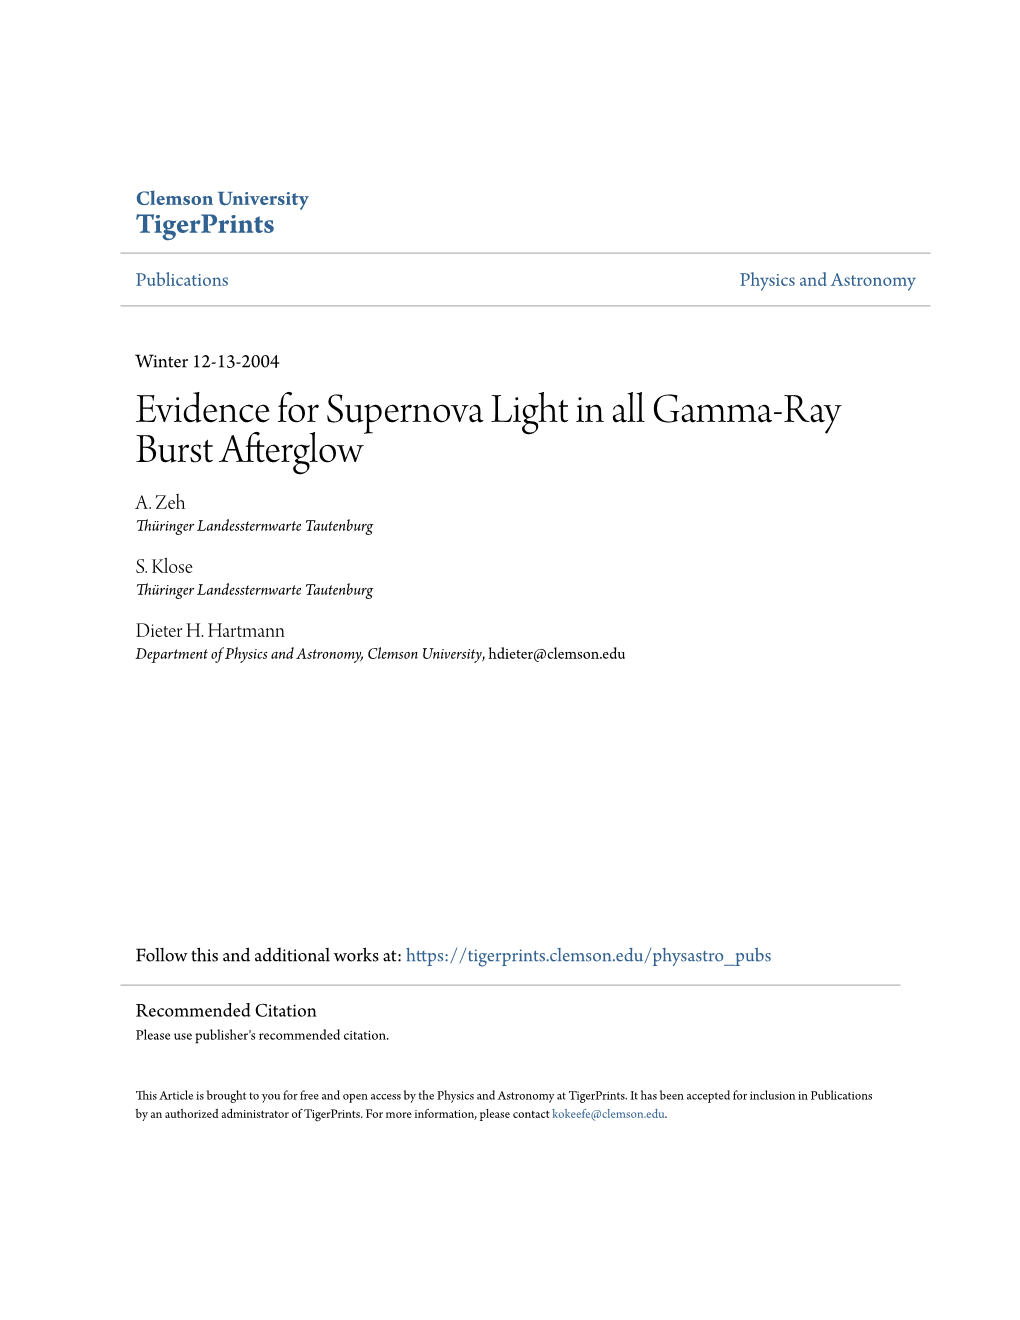 Evidence for Supernova Light in All Gamma-Ray Burst Afterglow A